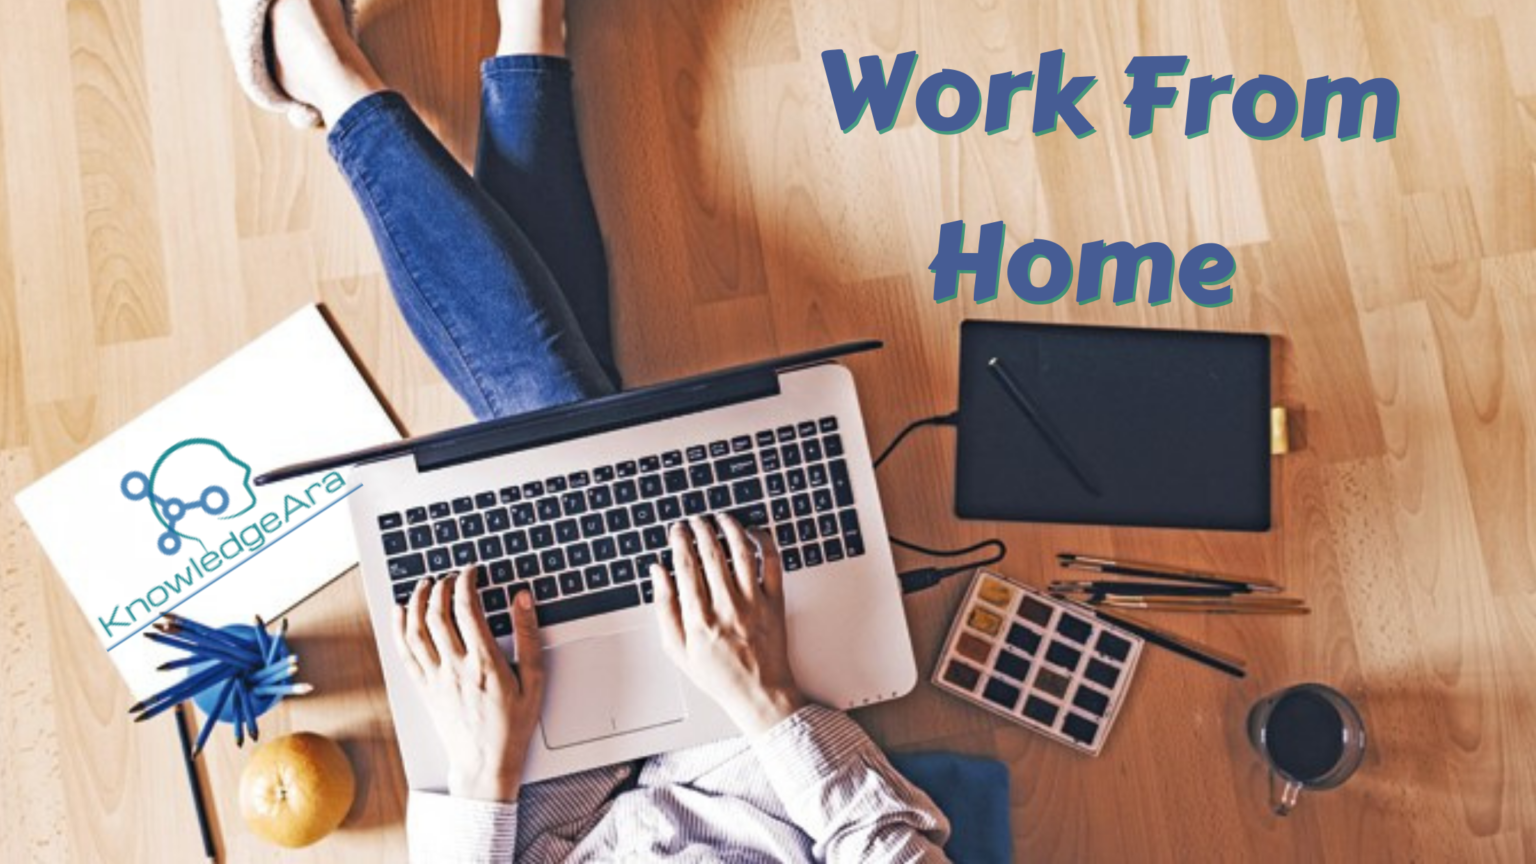 Working from Home картинки. Work from Home jobs. A Home from Home. Work form home